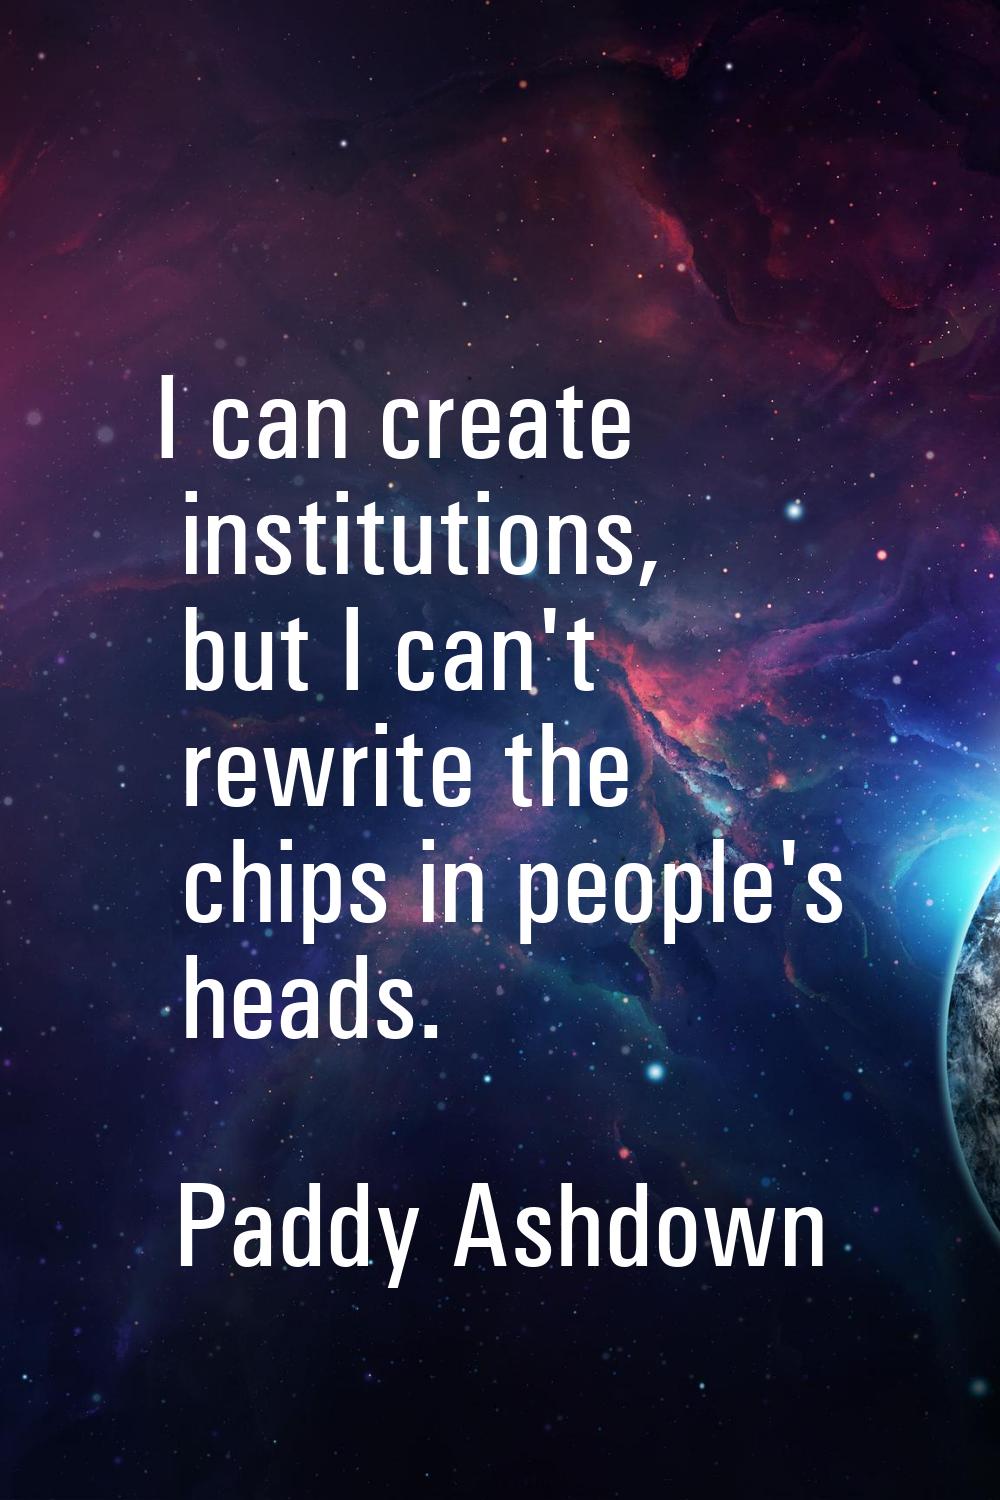 I can create institutions, but I can't rewrite the chips in people's heads.